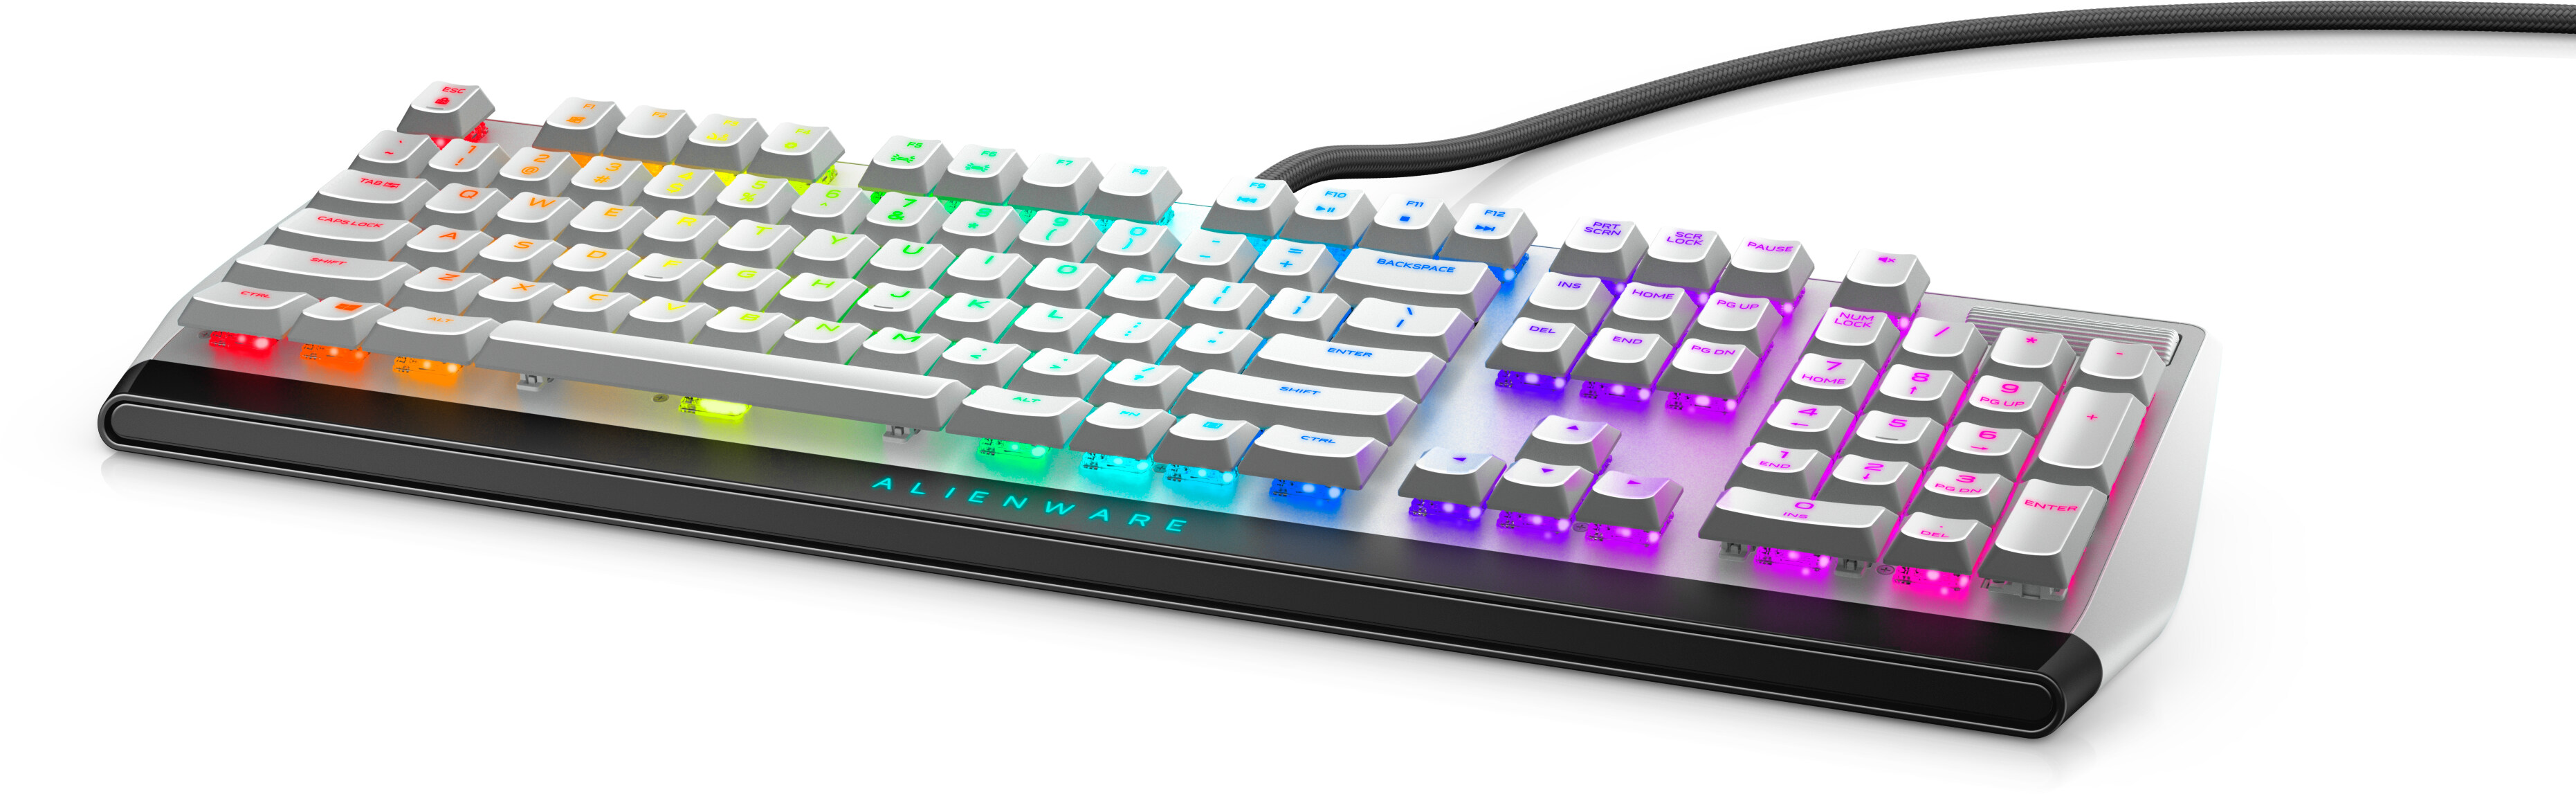 Alienware Mechanical Backlit Gaming Keyboard & Wired Gaming Mouse - AW510K  & AW610M : Gaming Accessories, Keyboards & Mice